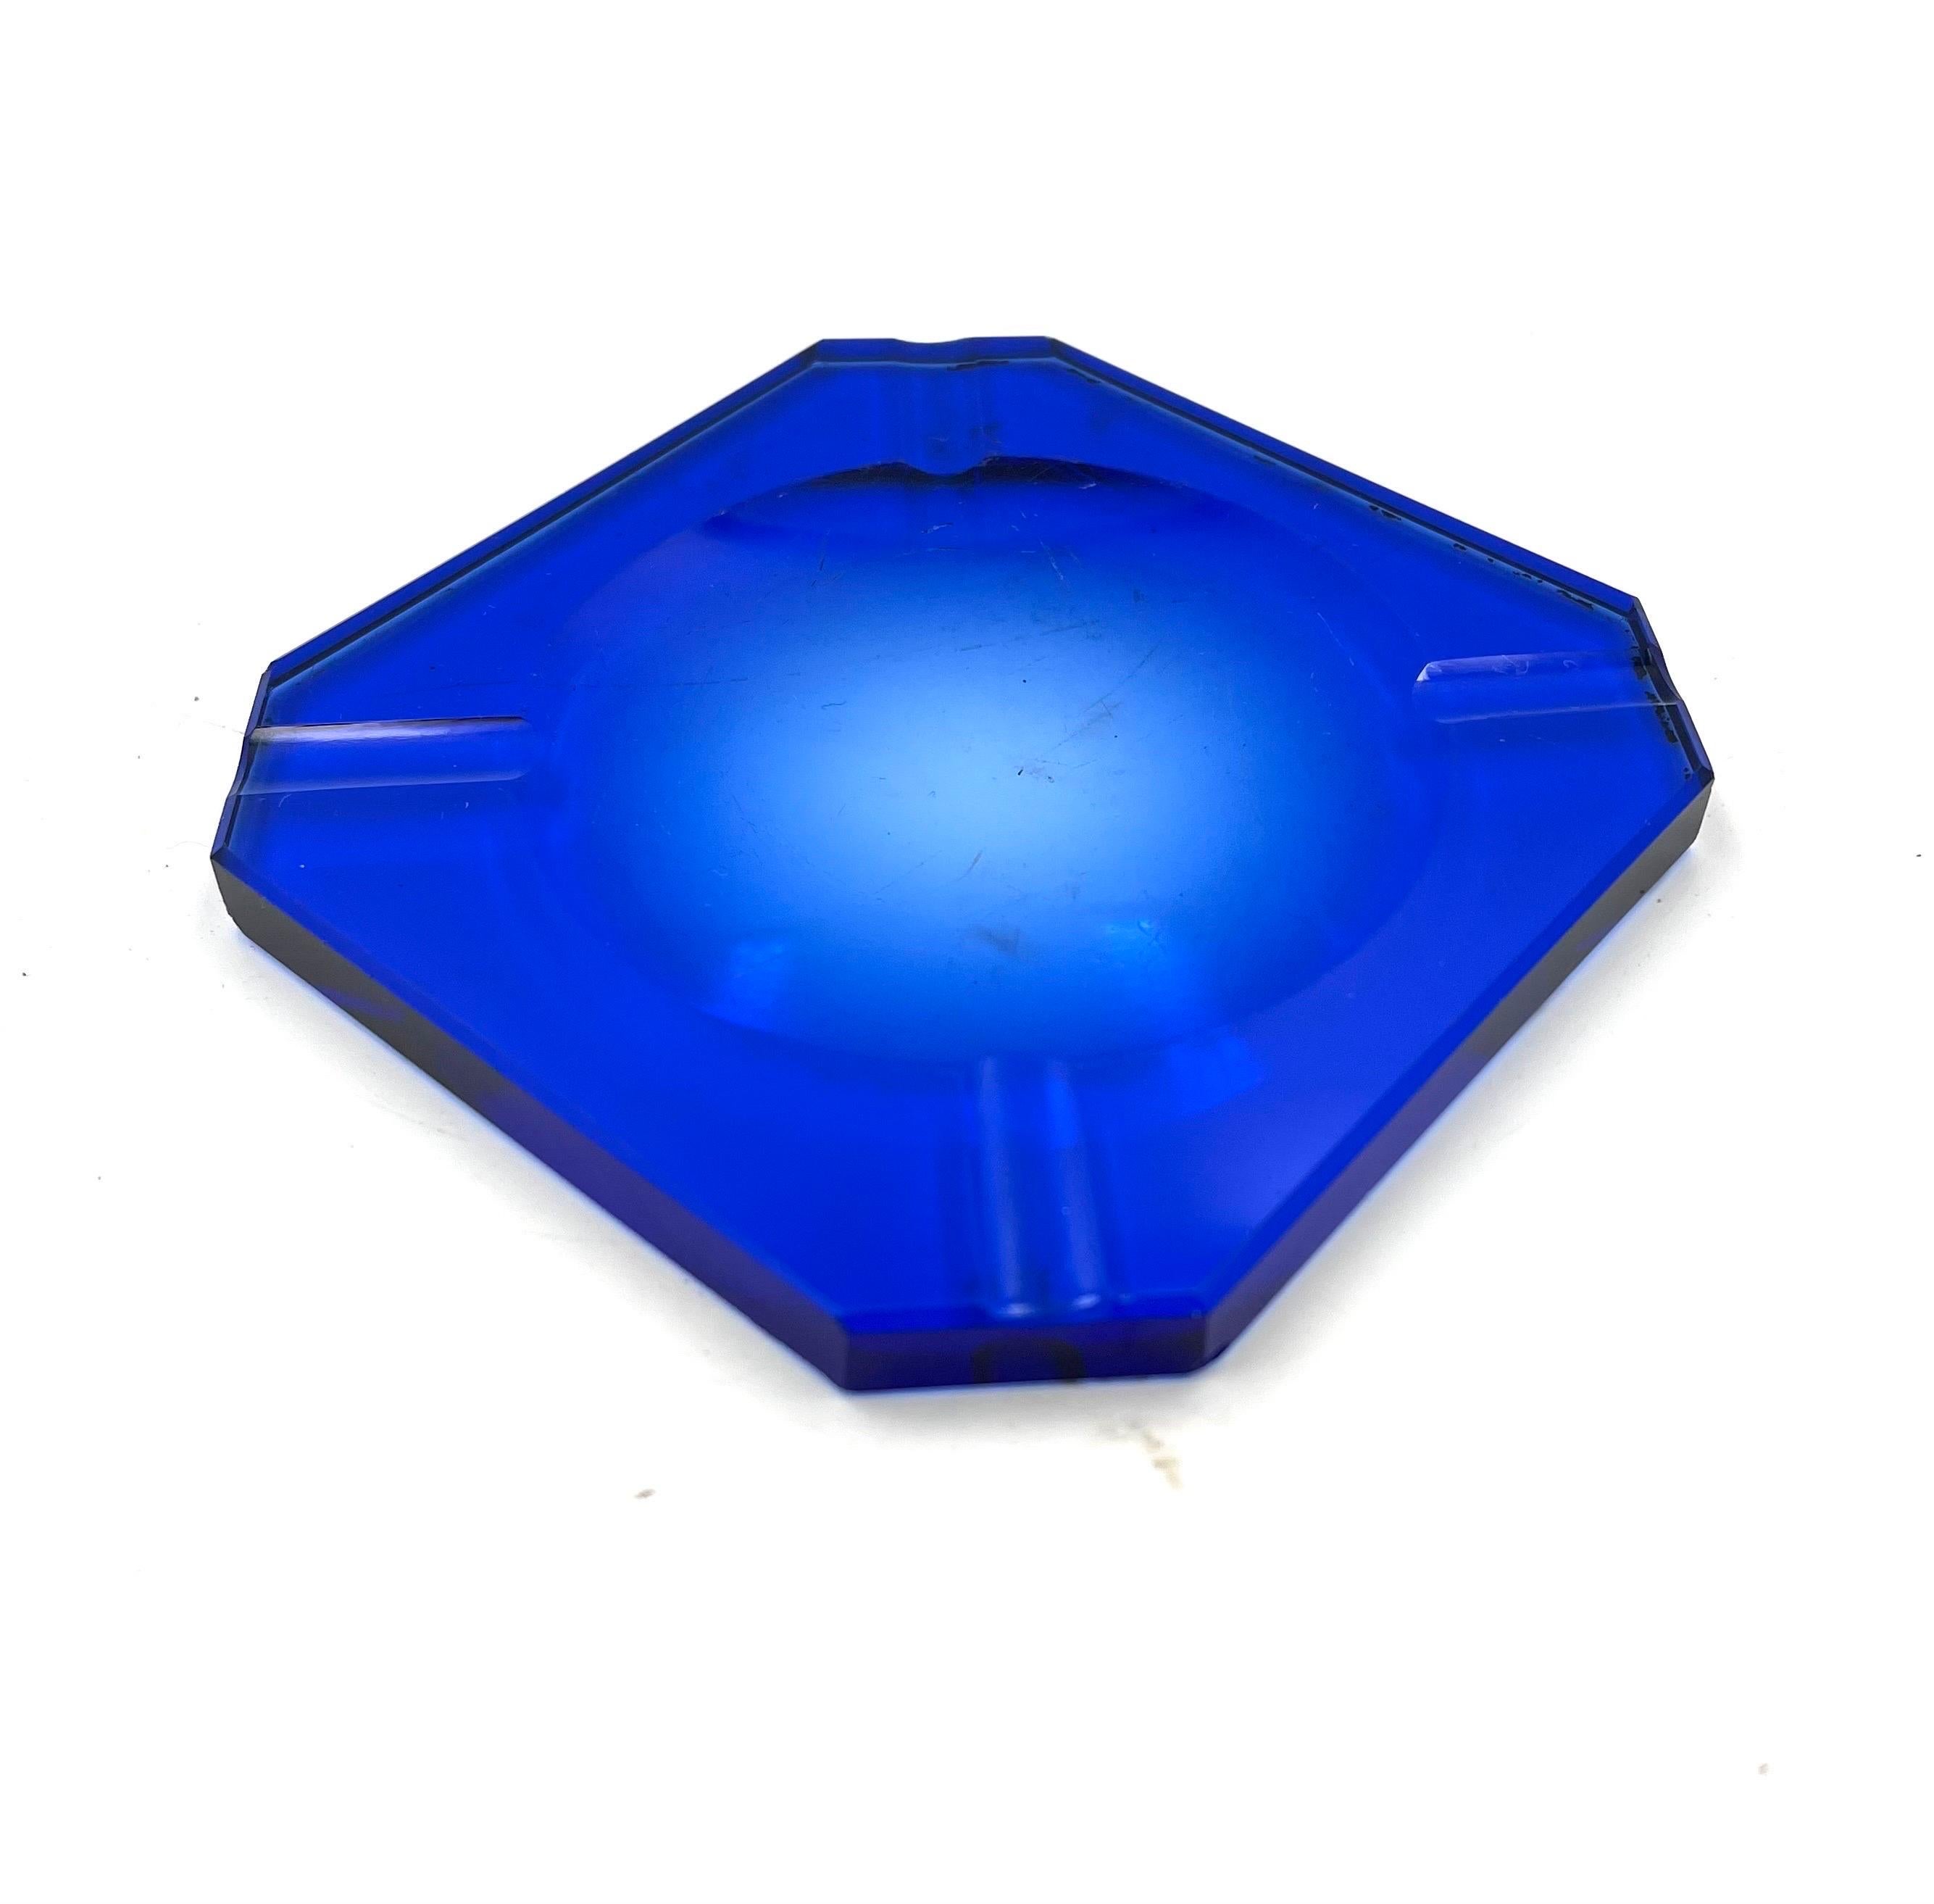 Beautiful art deco glass ashtray with no chips or cracks light wear, beveled edge by Jean Luce.